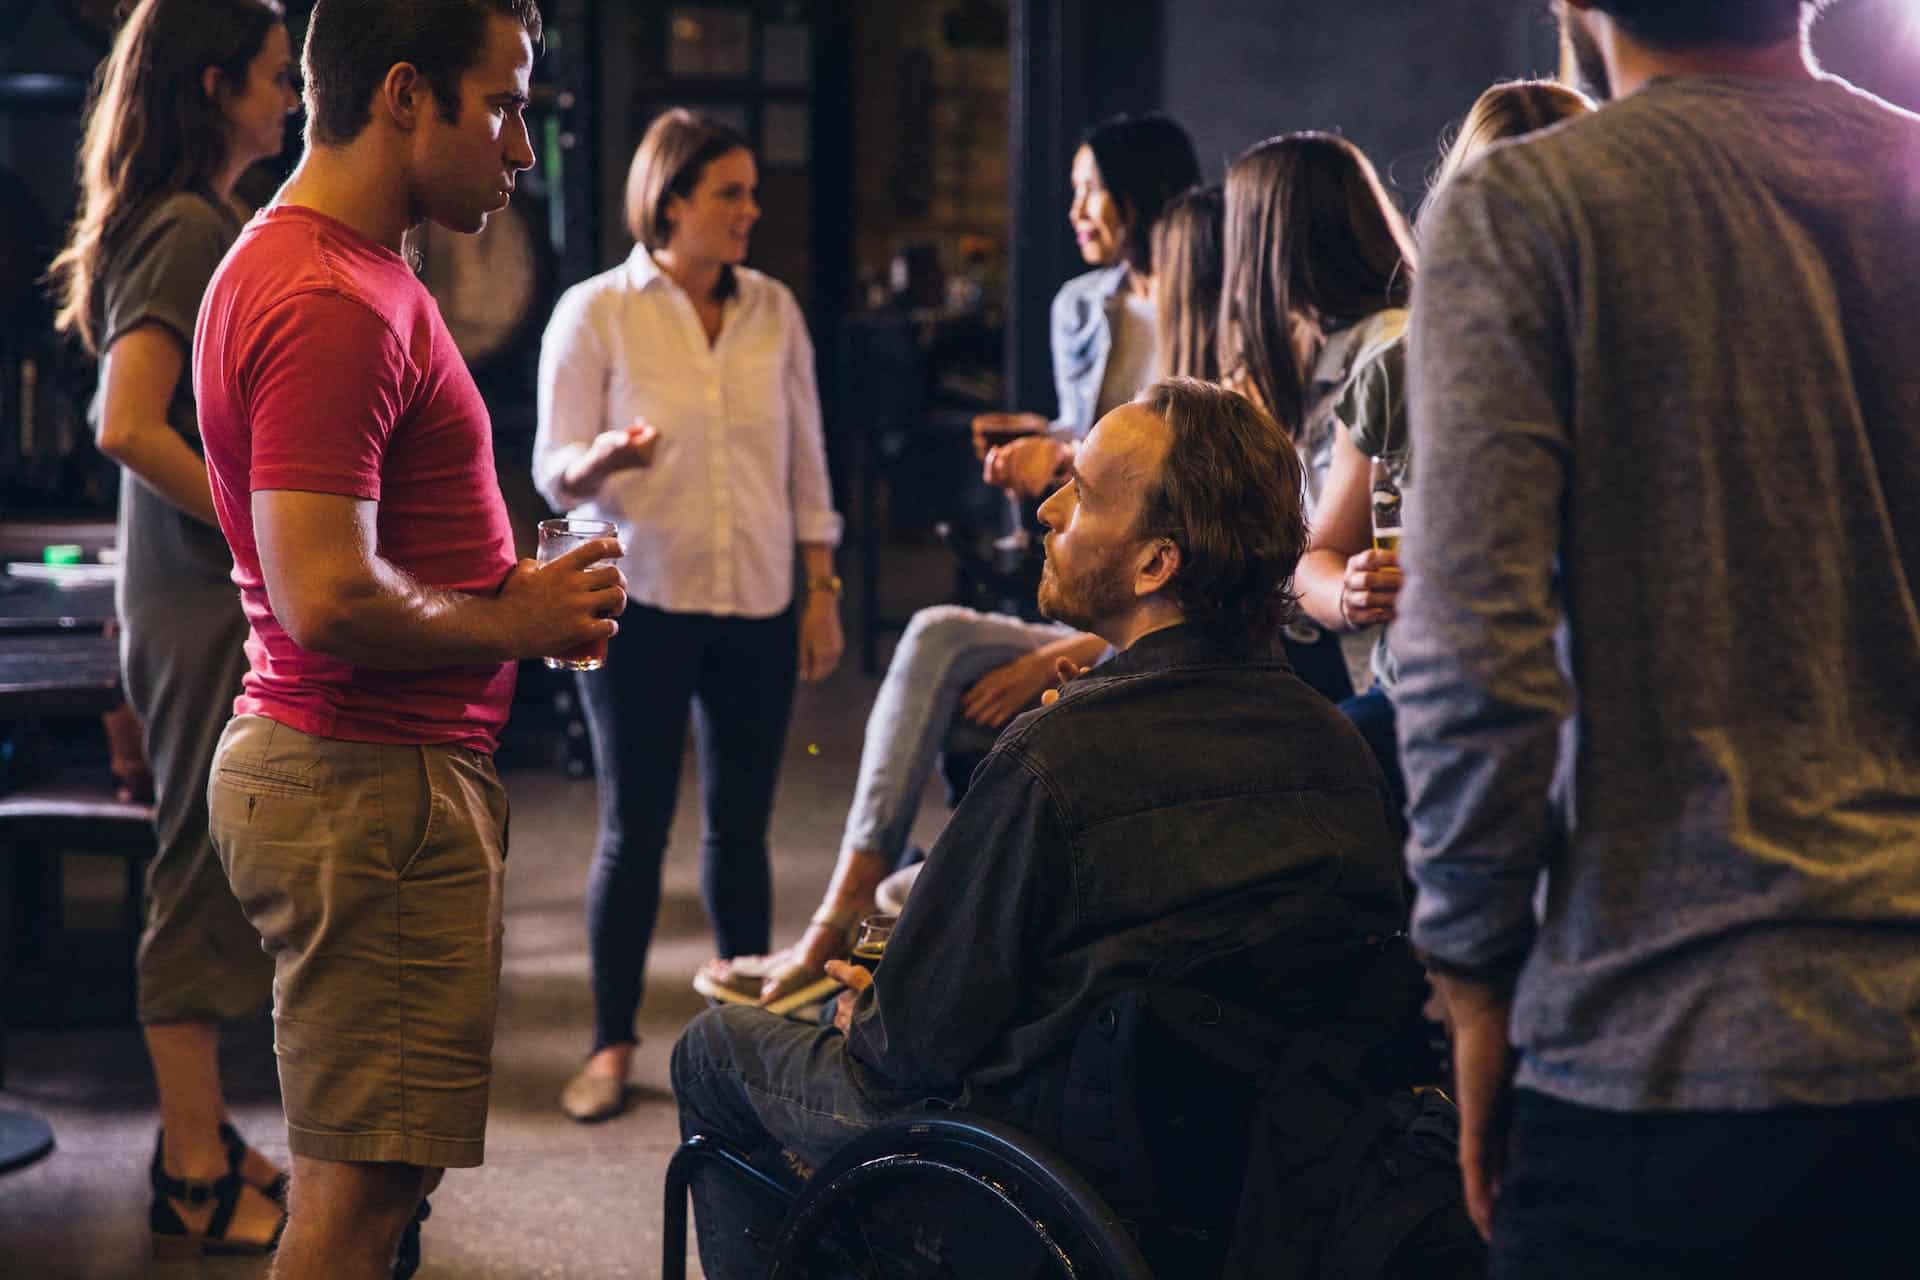 Image Title: Inclusive Conversations Image Description: Colleagues conversing in an accessible office gathering Alt Text: Accessible Office Event Source: https://www.pexels.com/photo/group-of-people-drinking-and-talking-3009769/